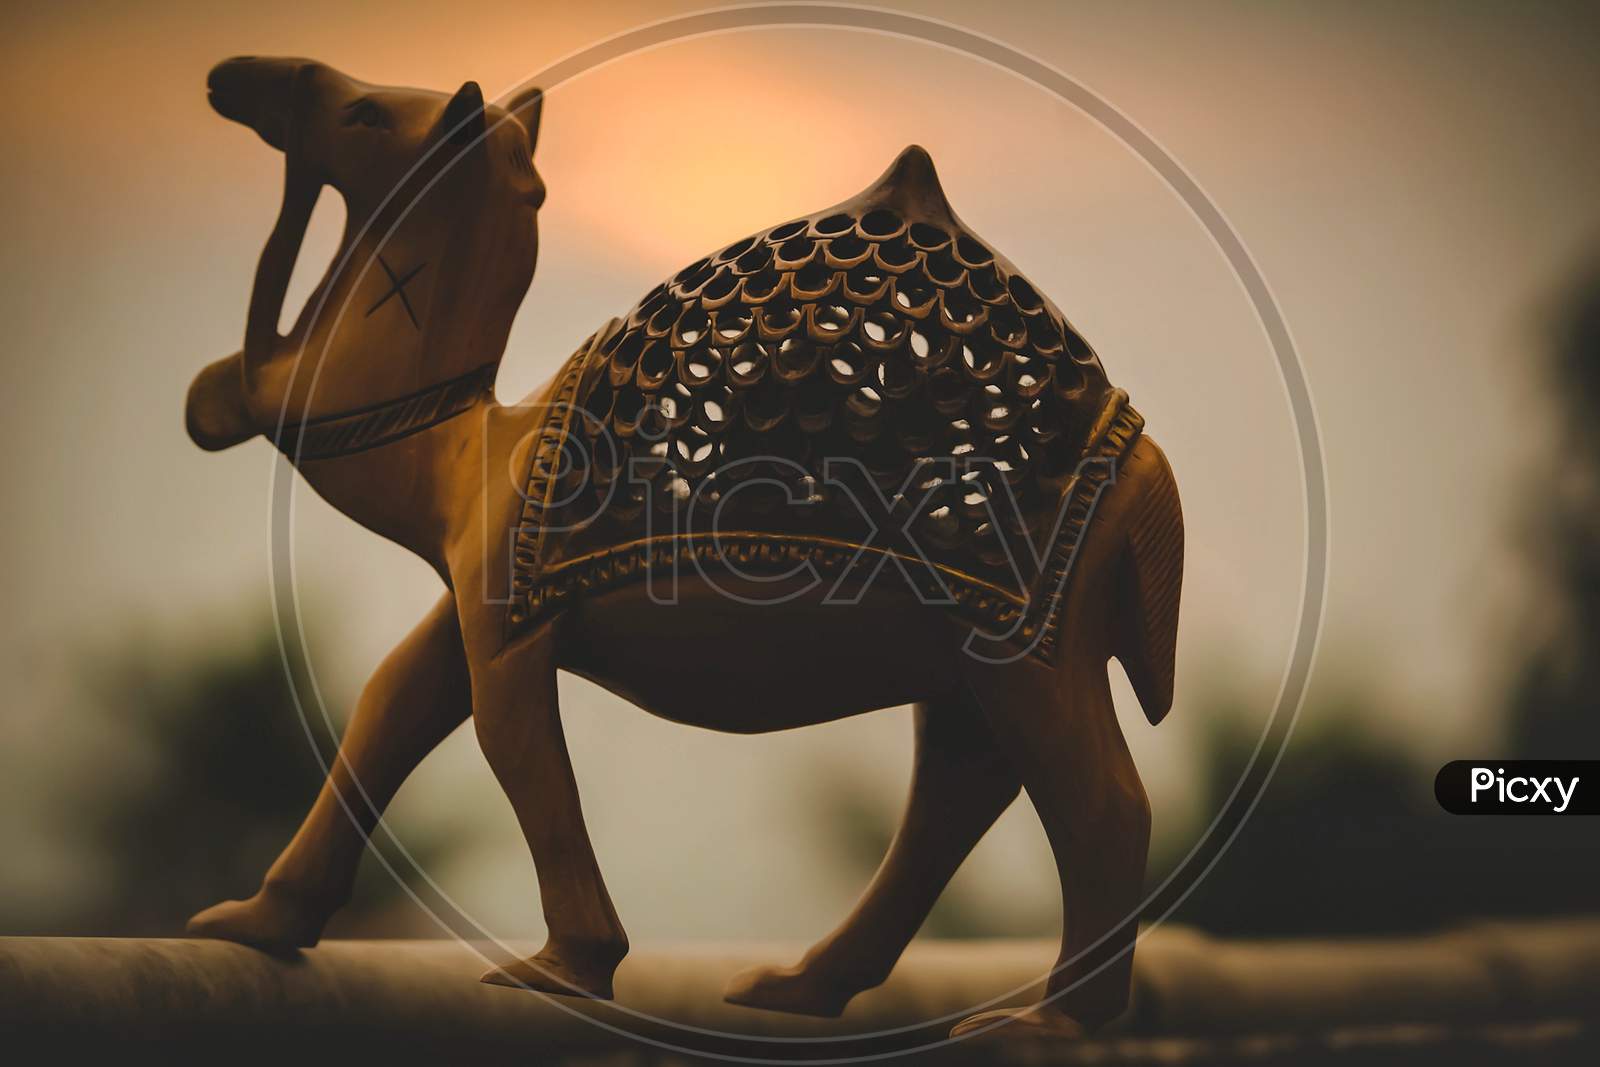 A camel sculpture photo with sunset